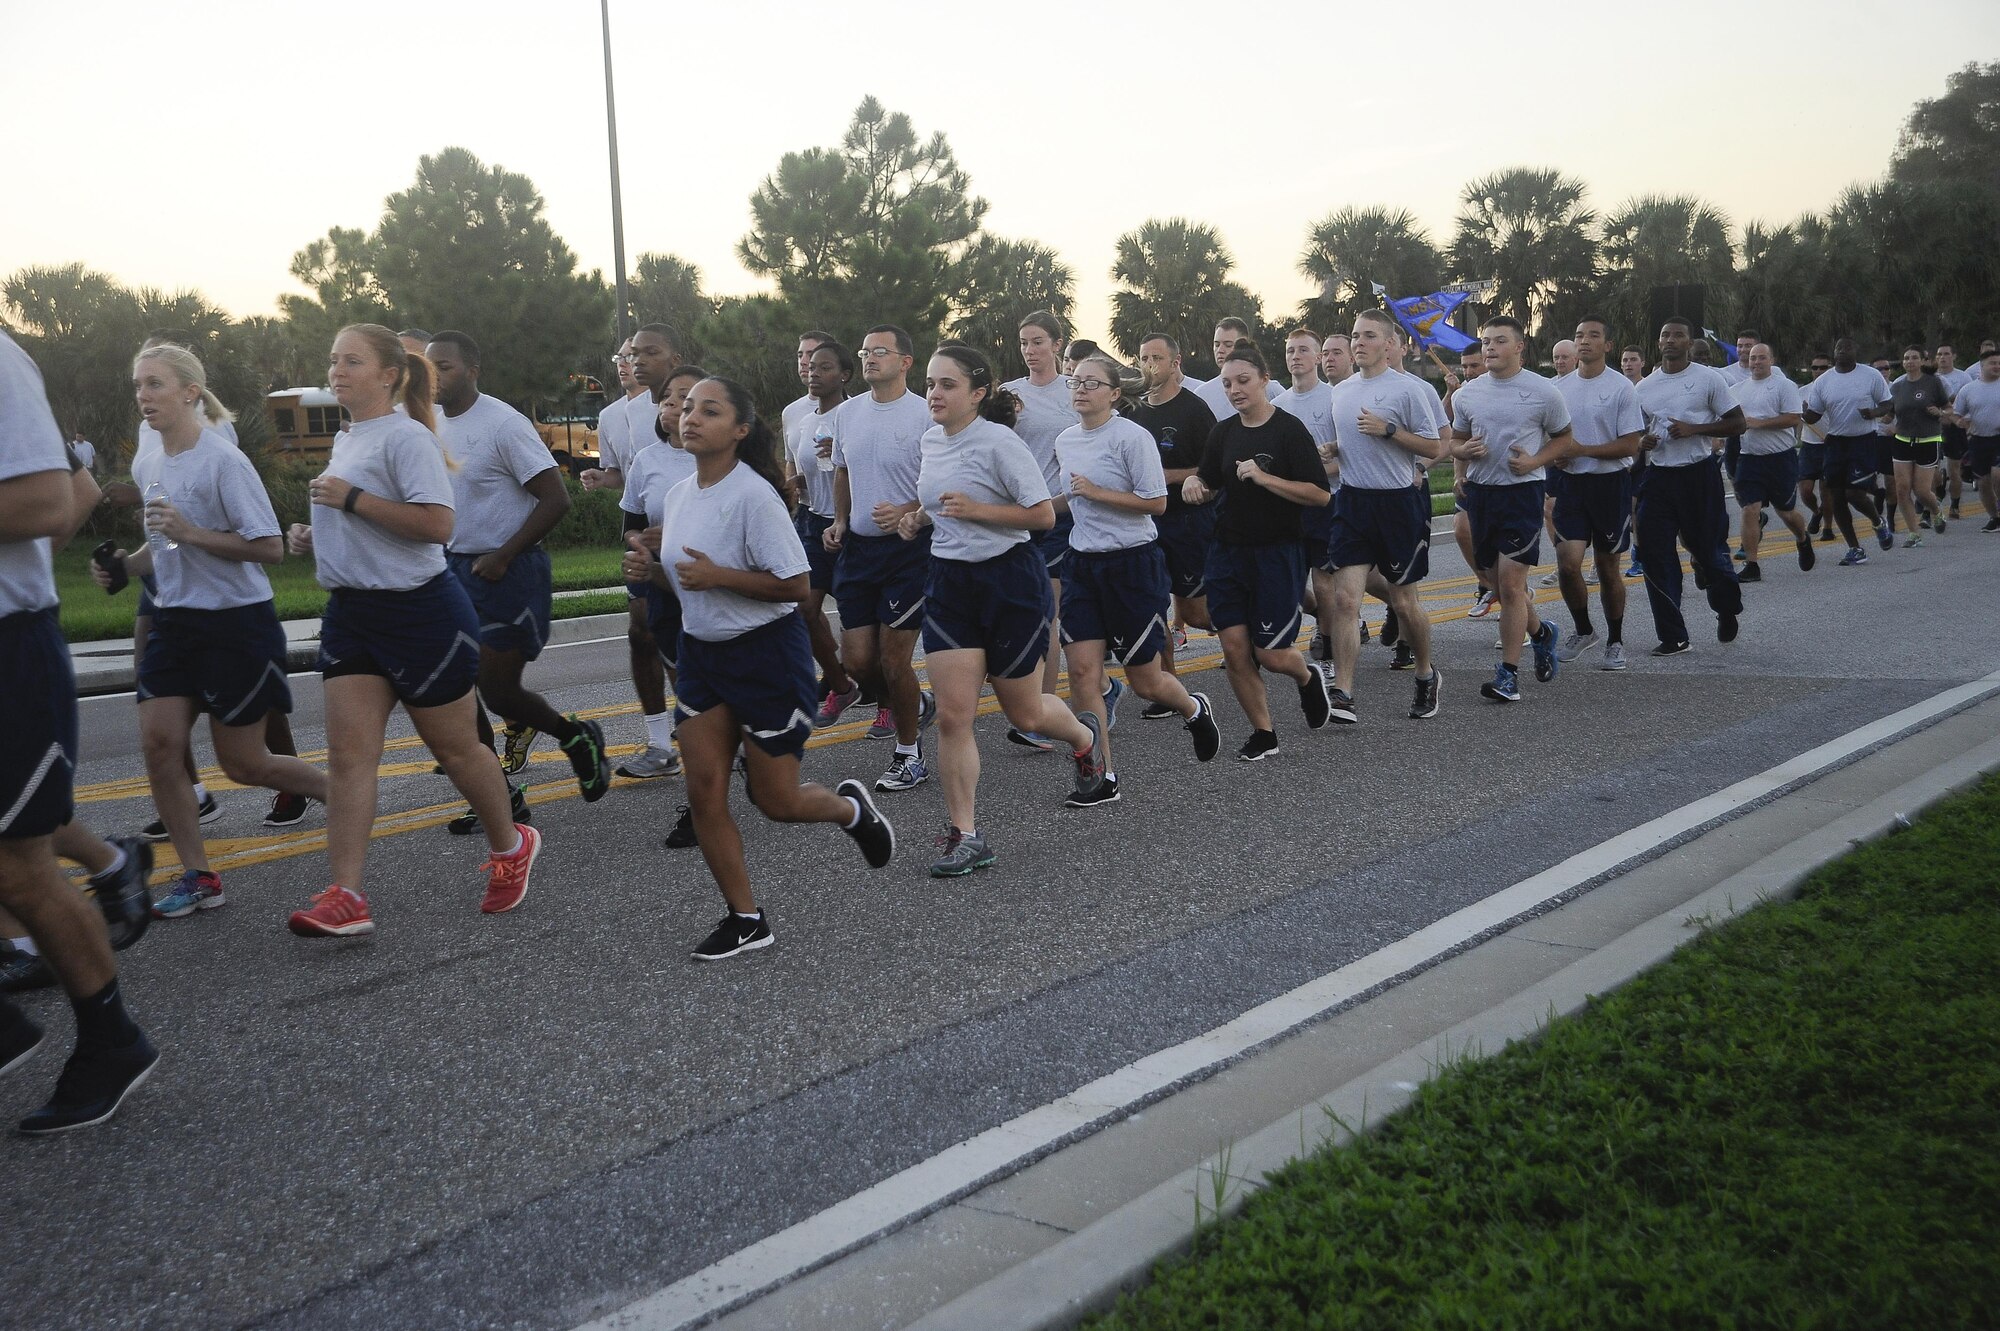 Members of Team MacDill run in formation during the 6th Annual Helton Haul Memorial Run at MacDill Air Force Base, Fla., Sept. 8, 2016. The run started and ended at Helton Hall, the 6th Security Forces Squadron building, named after a fallen MacDill Airman, 1st Lt. Joseph D. Helton. (U.S. Air Force photo by Airman 1st Class Mariette Adams)